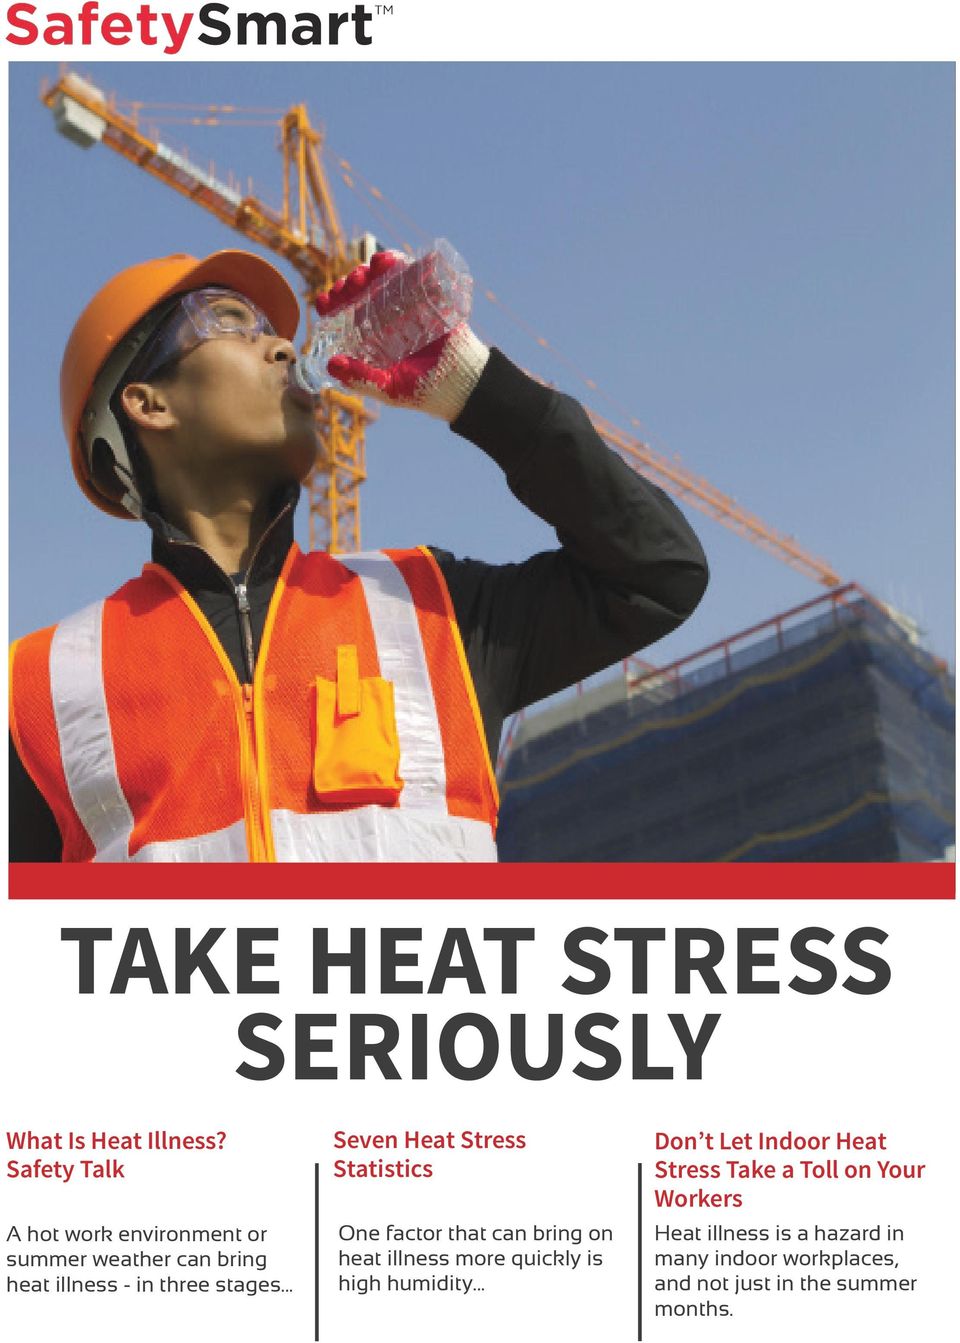 .. Seven Heat Stress Statistics One factor that can bring on heat illness more quickly is high